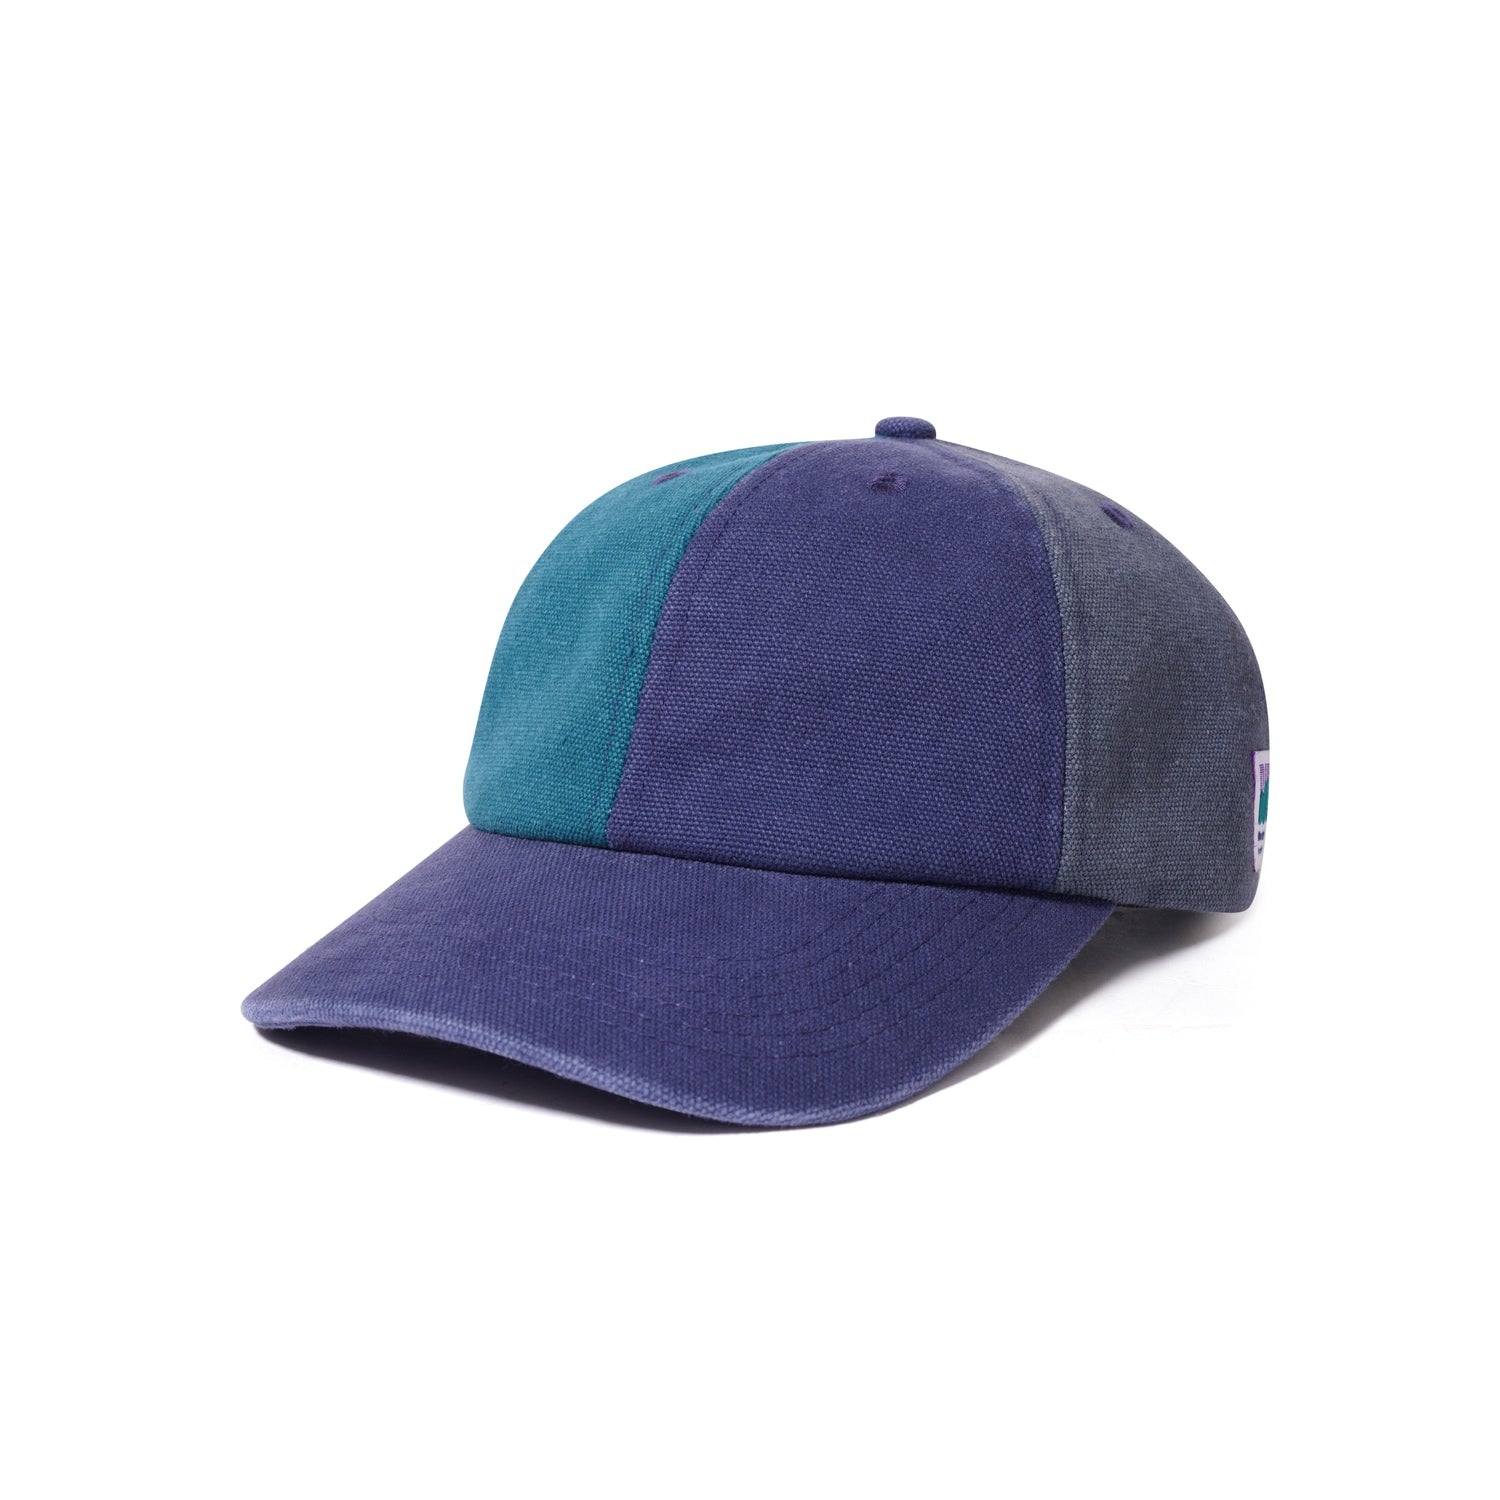 Butter Goods Canvas Patchwork 6 Panel Cap Washed Navy